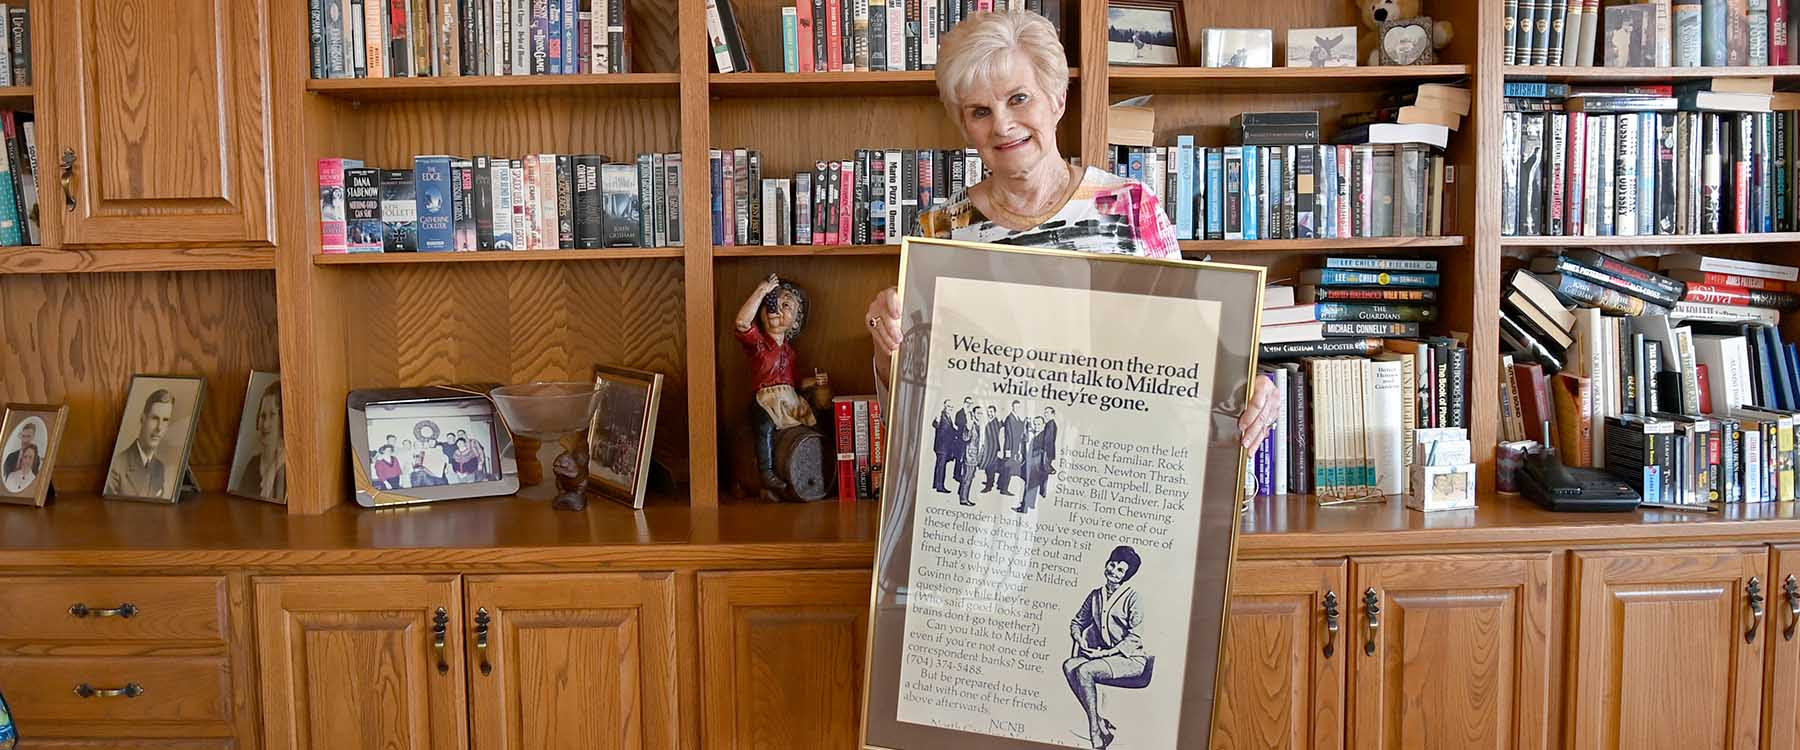 Blazing trails comes naturally to Charlotte College alumna Mildred Gwinn